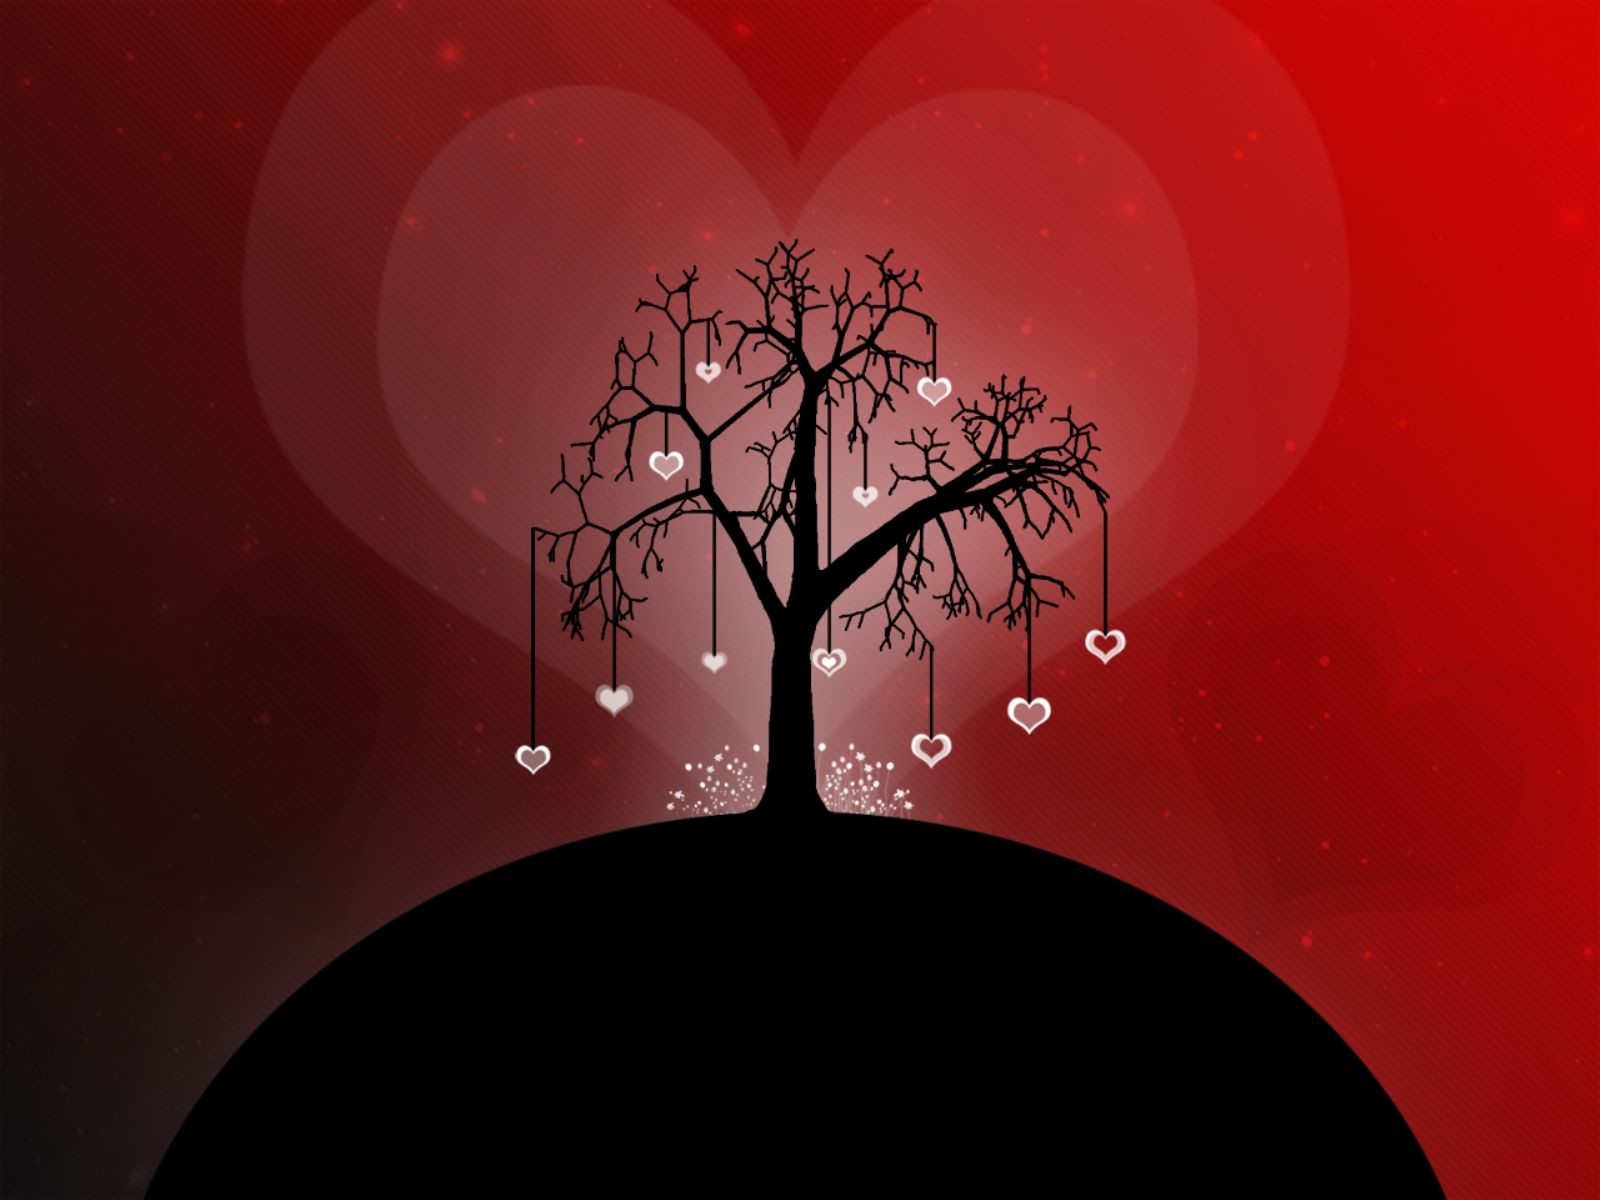 689 Love HD Wallpapers | Backgrounds - Wallpaper Abyss